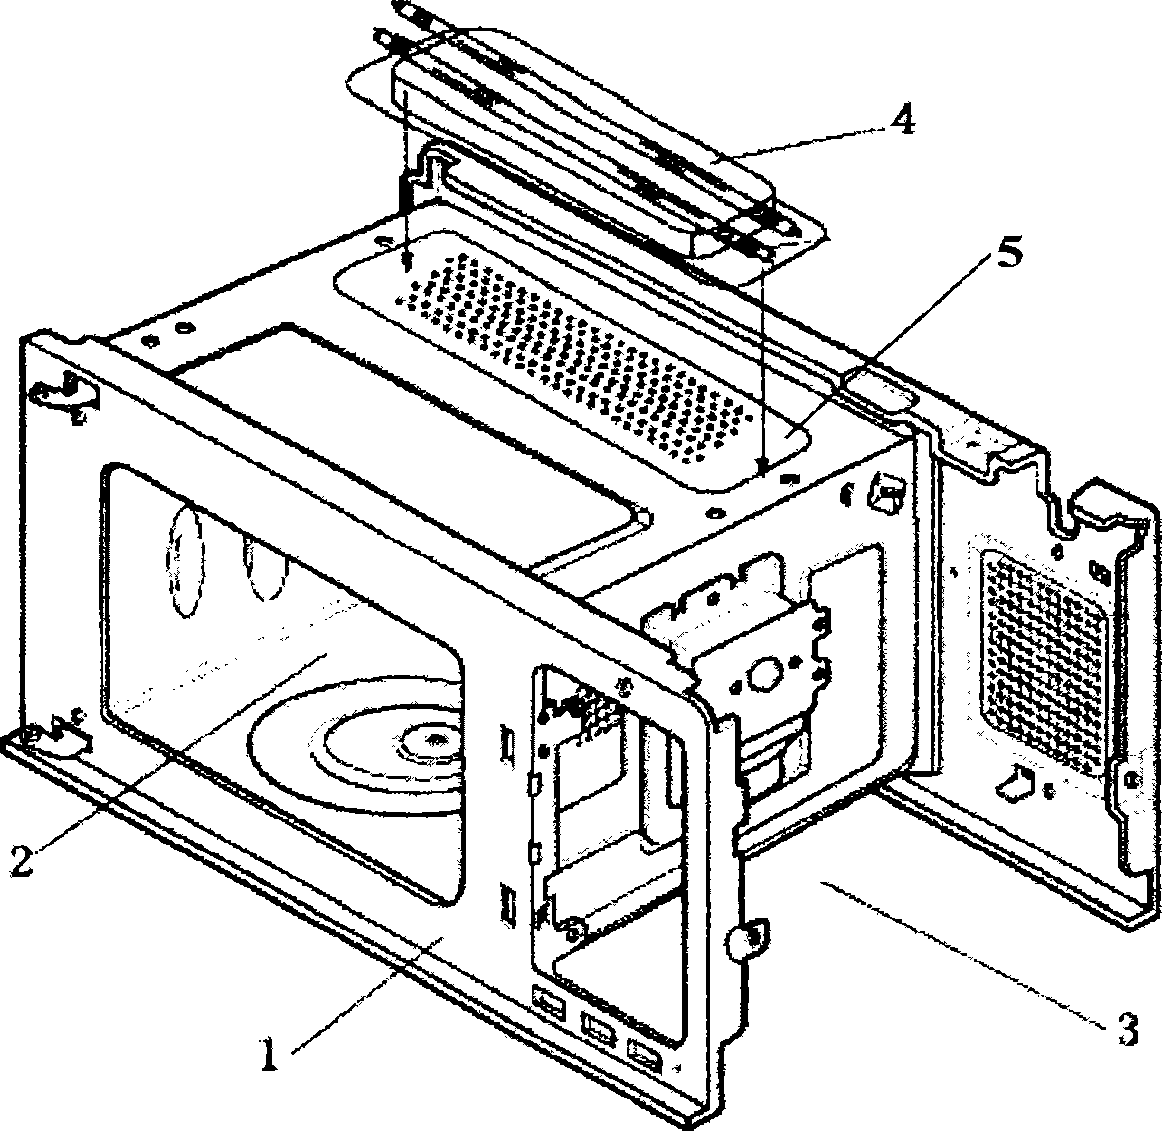 Barbecue tray components of microwave oven